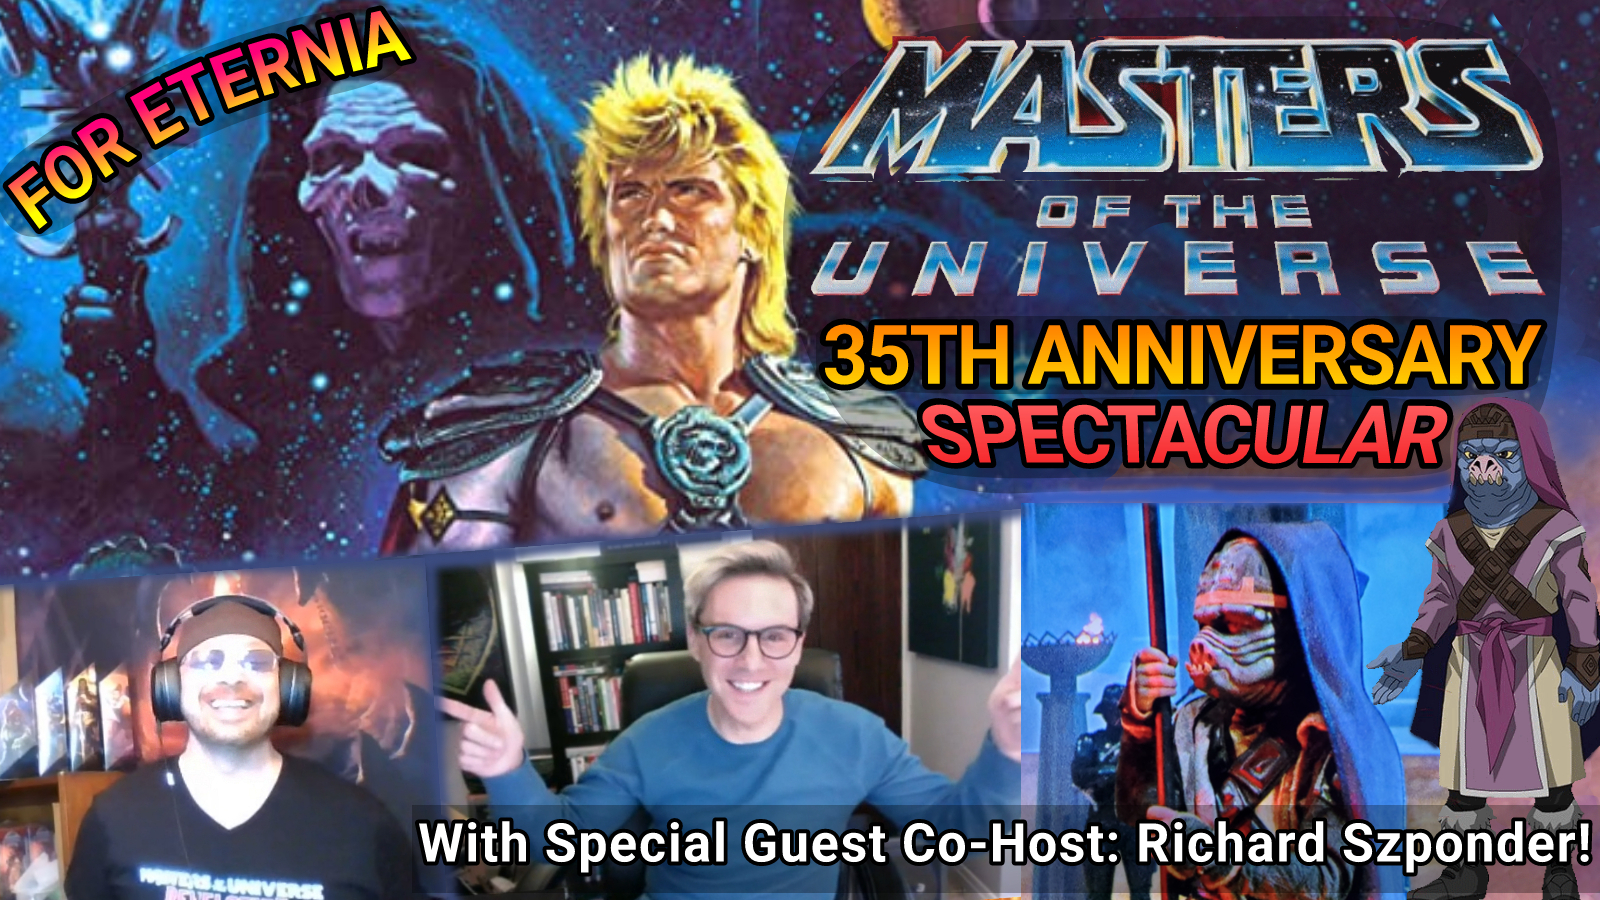 Listen to the ”Masters of the Universe” 35th Anniversary Celebration Podcast w/ Richard Szponder aka ”Pigboy”!